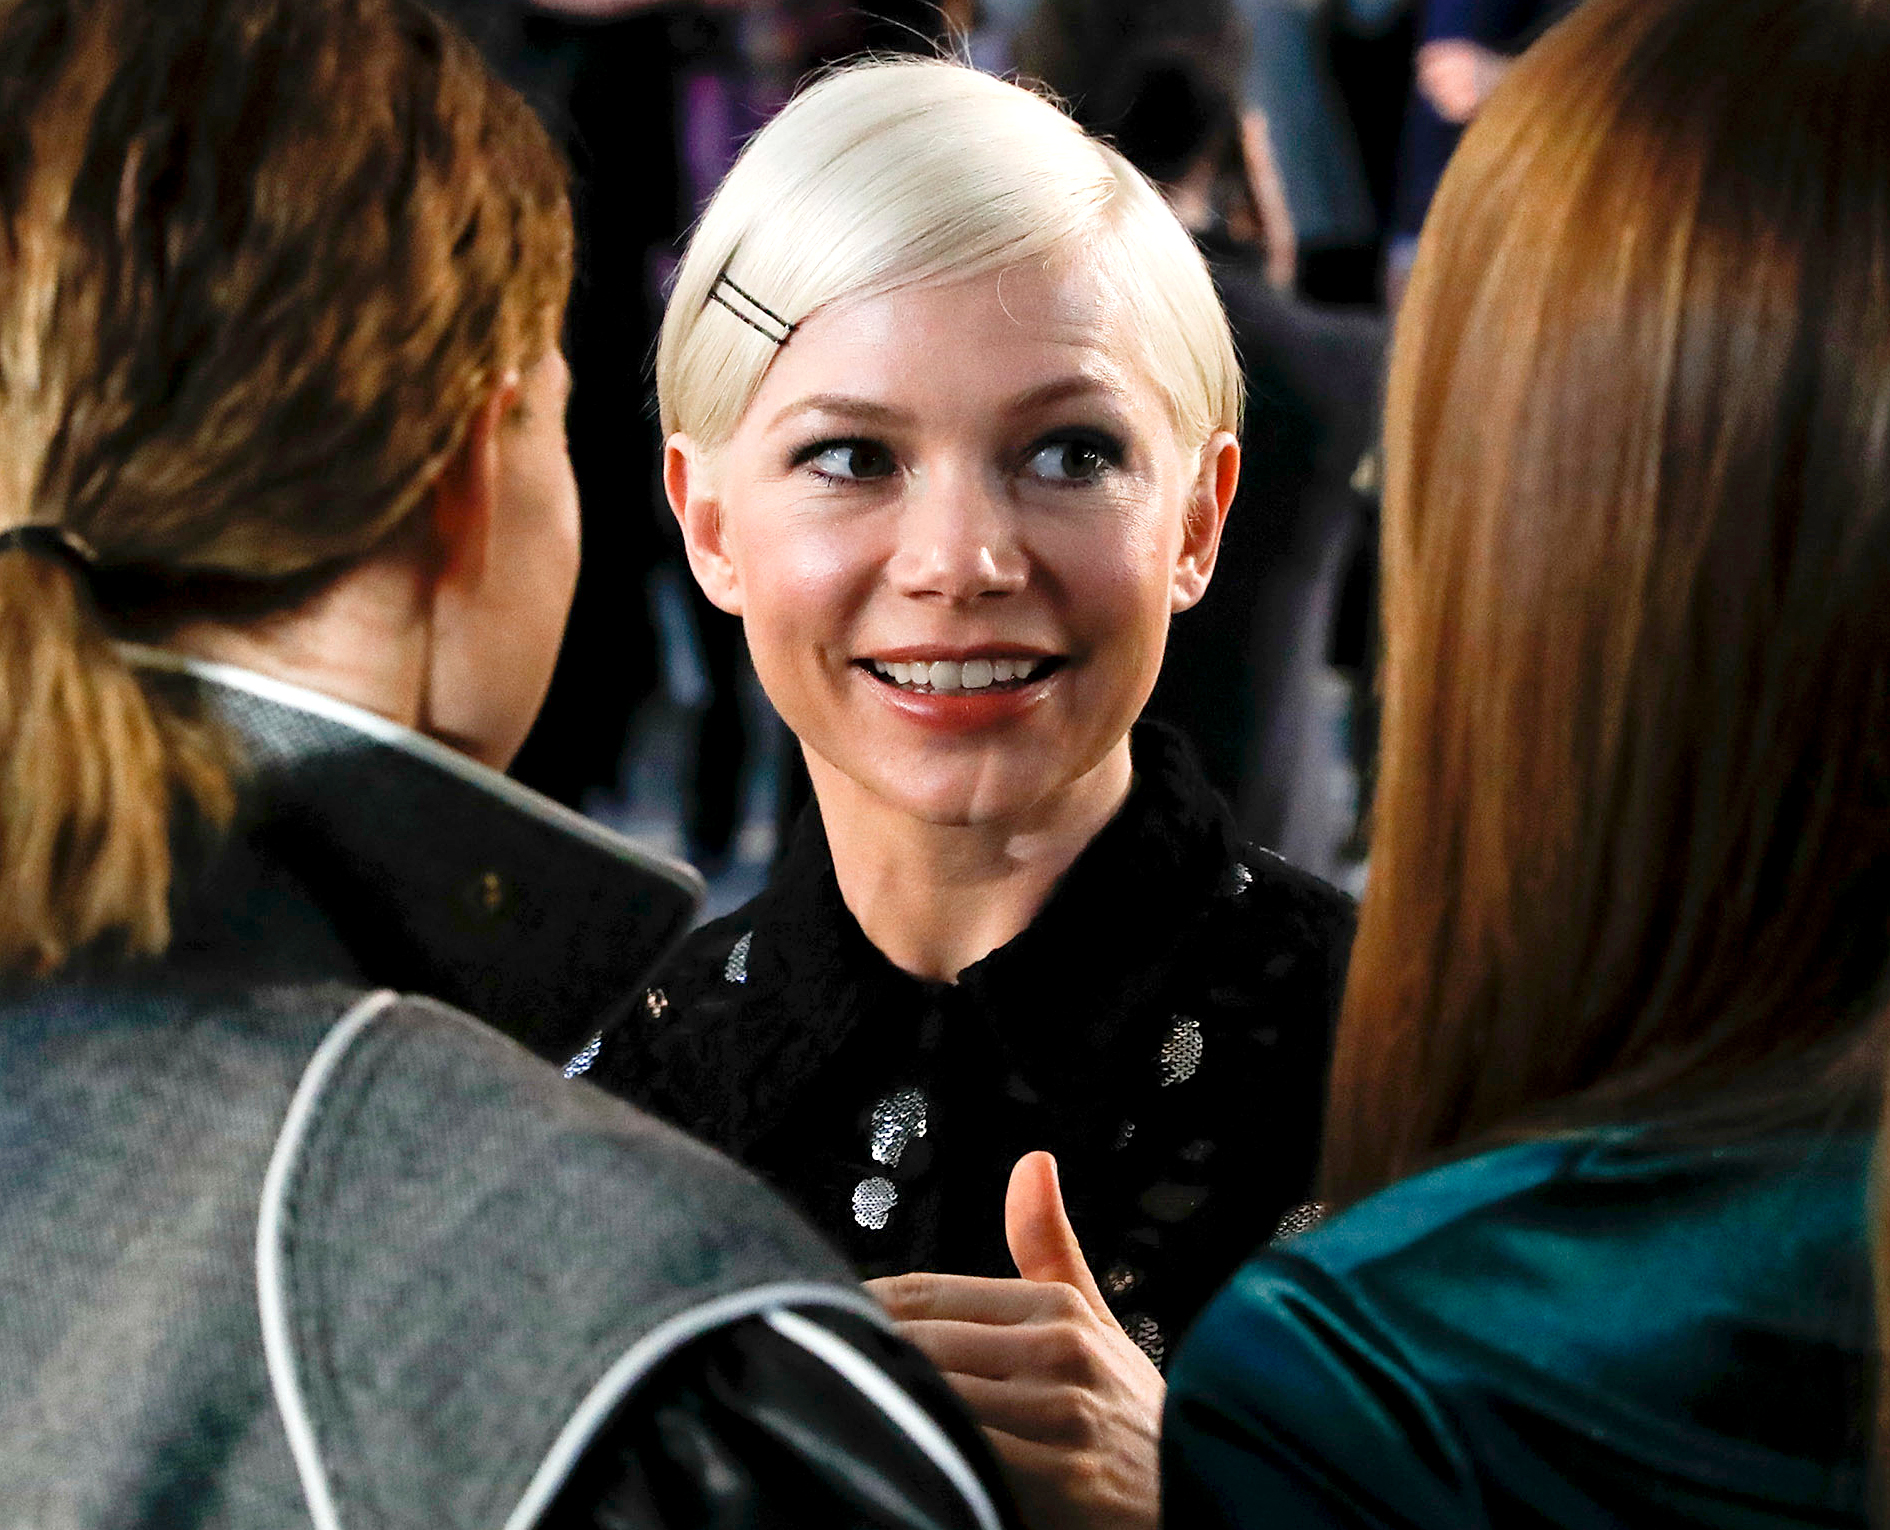 Do You Even Recognize Michelle Williams With Her Hair in an Updo Here?